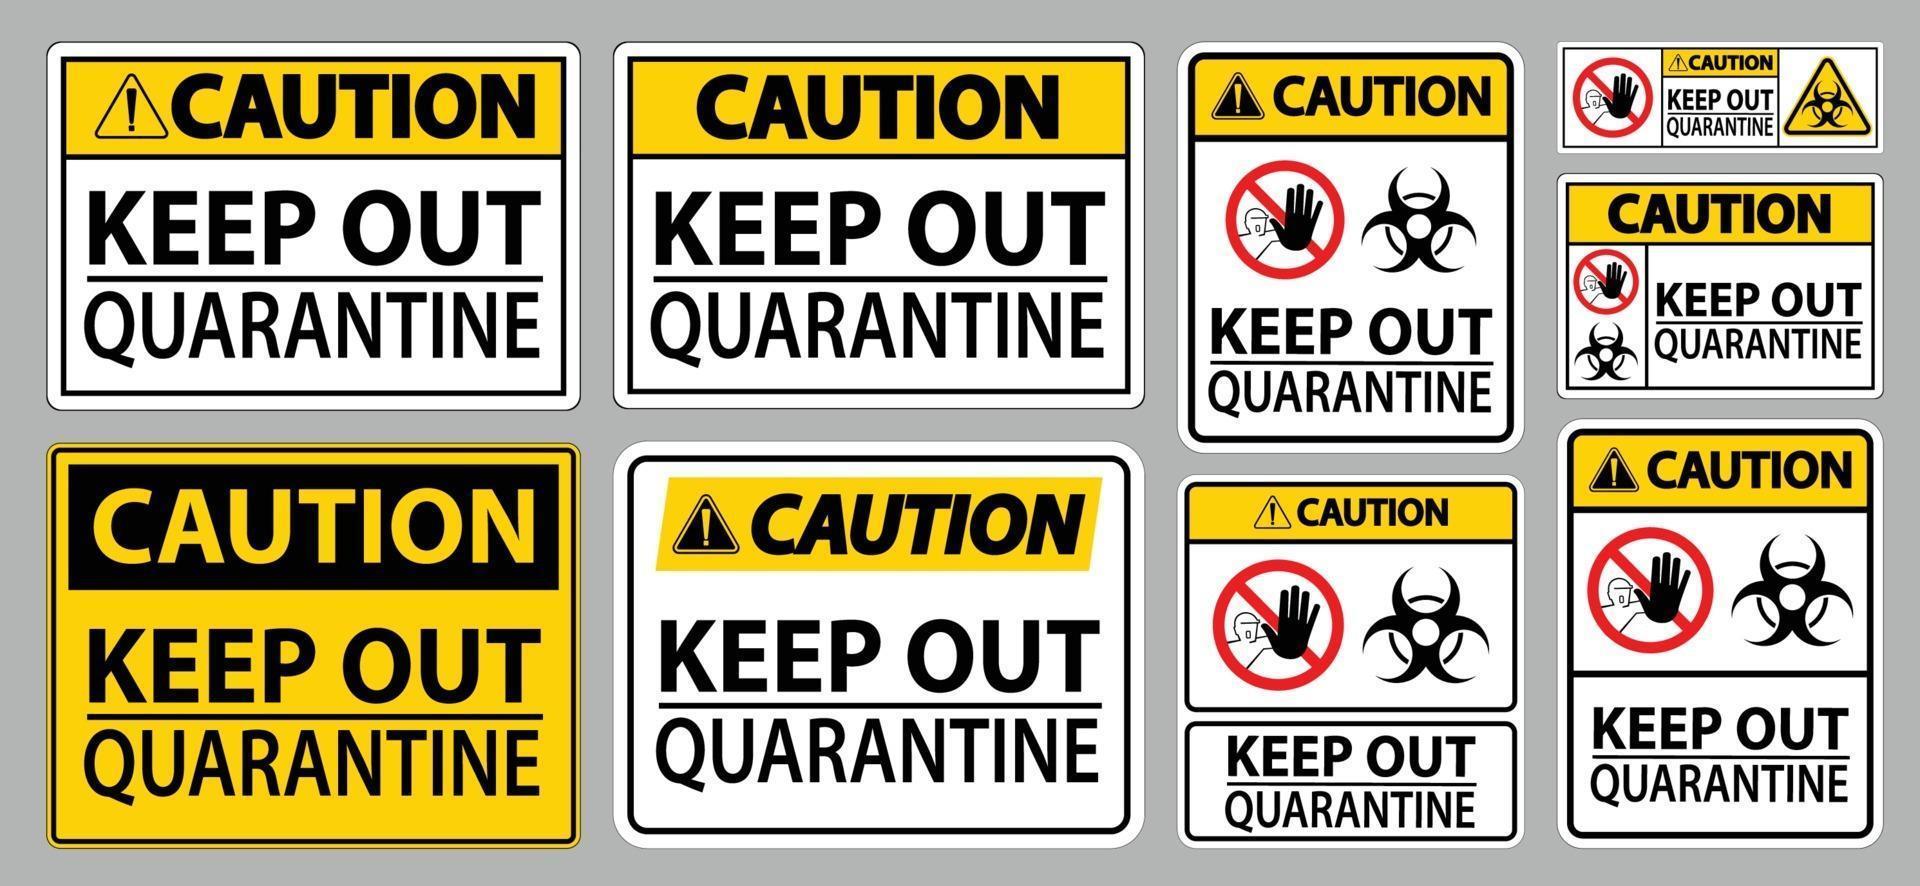 Caution Keep Out Quarantine Sign Isolate On White Background,Vector Illustration EPS.10 vector